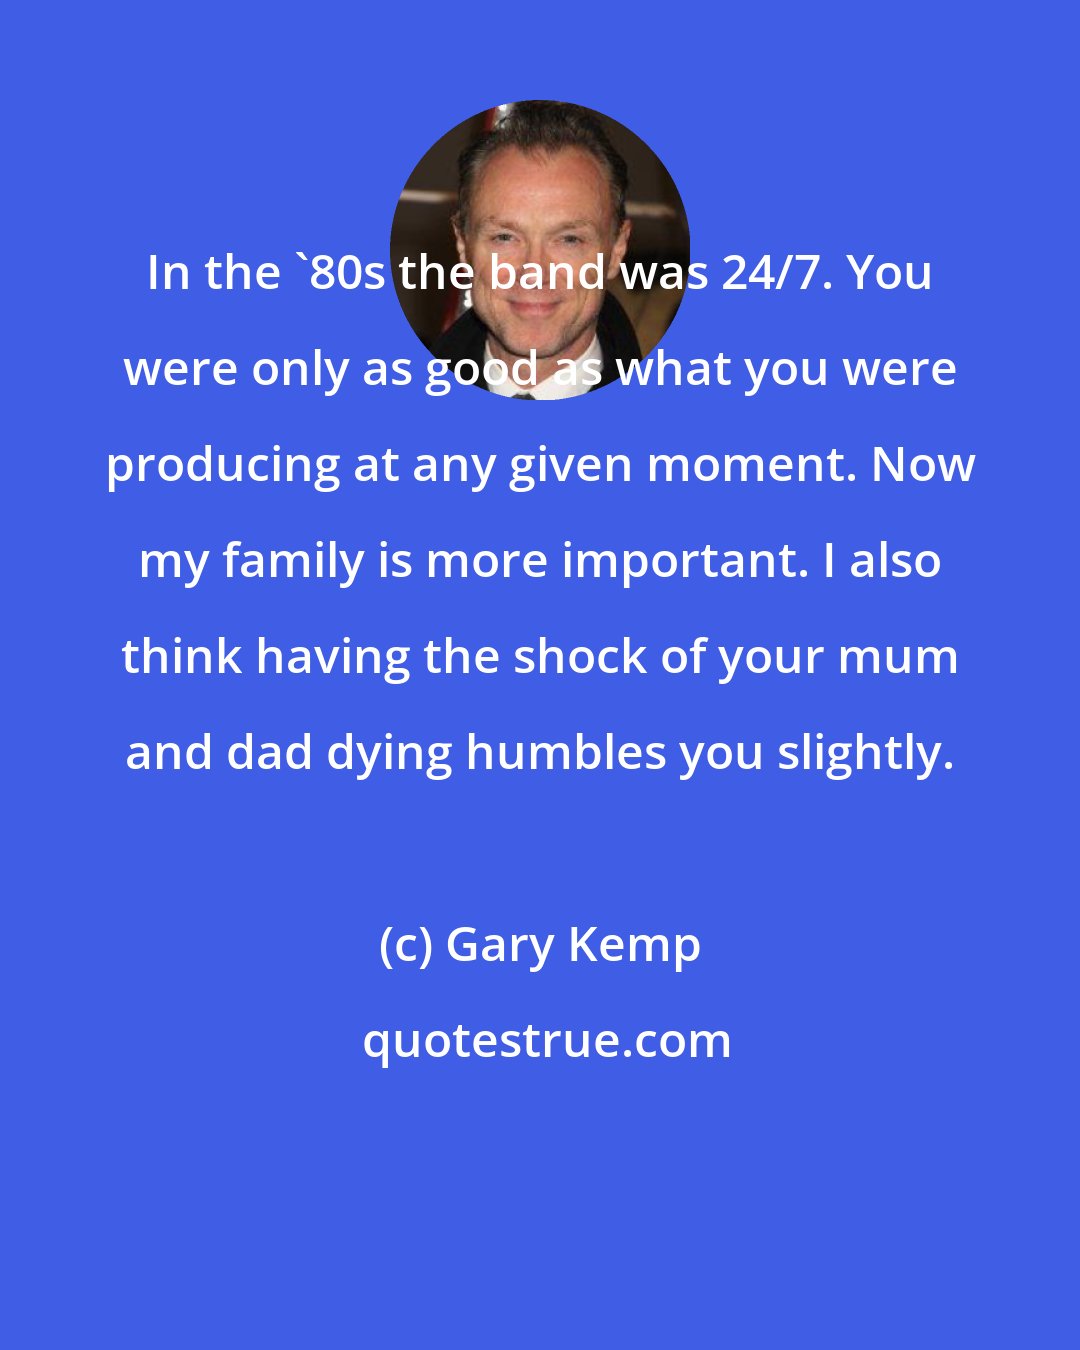 Gary Kemp: In the '80s the band was 24/7. You were only as good as what you were producing at any given moment. Now my family is more important. I also think having the shock of your mum and dad dying humbles you slightly.